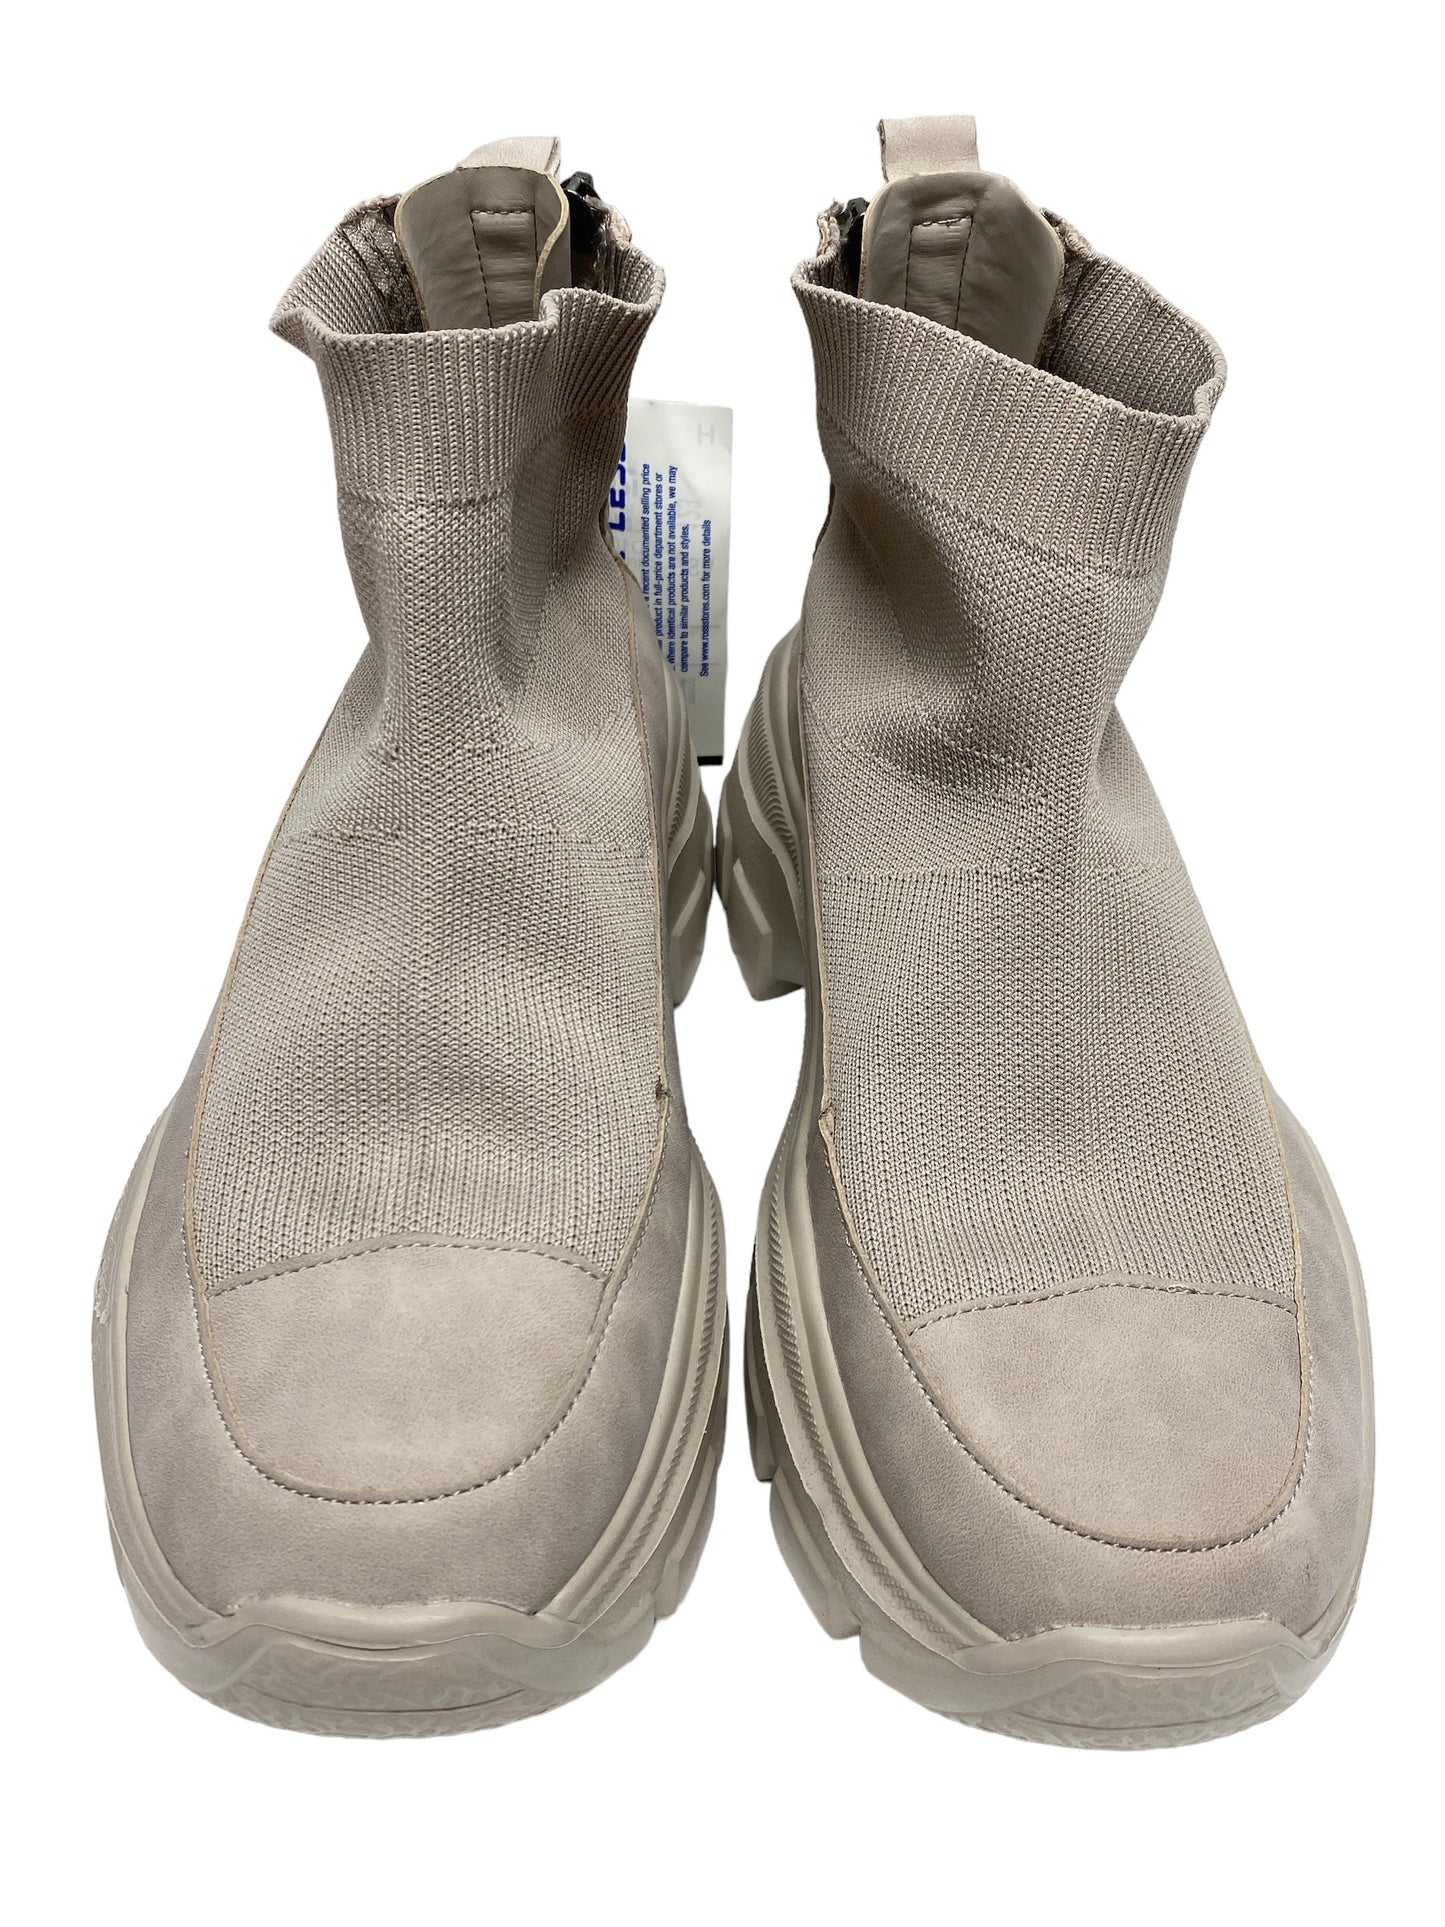 Beige Shoes Sneakers Forever 21, Size 9